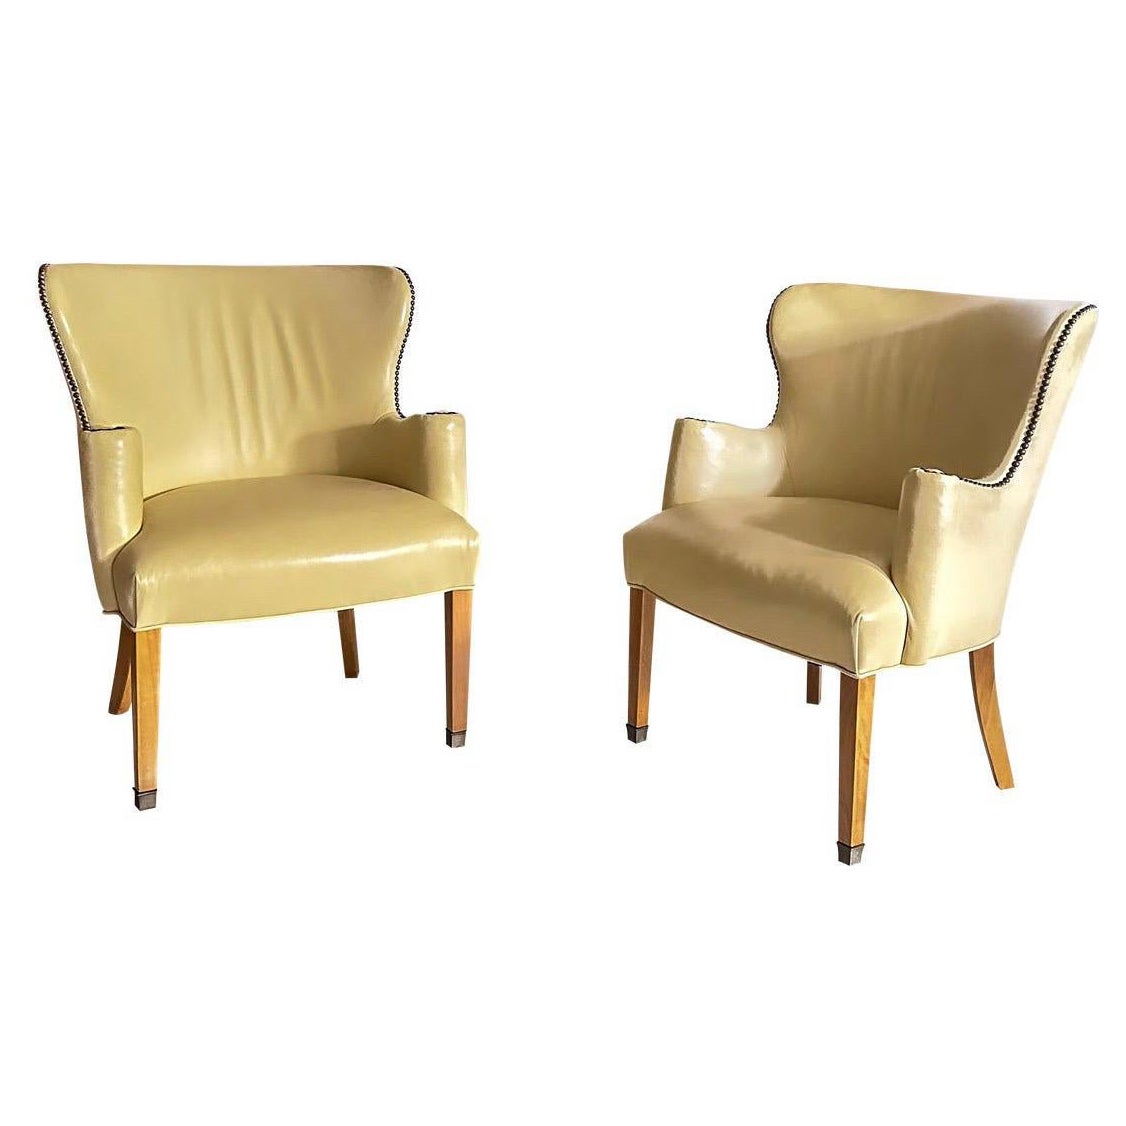 1940s Swedish Lamb Leather Wing Chairs Armchairs For Sale